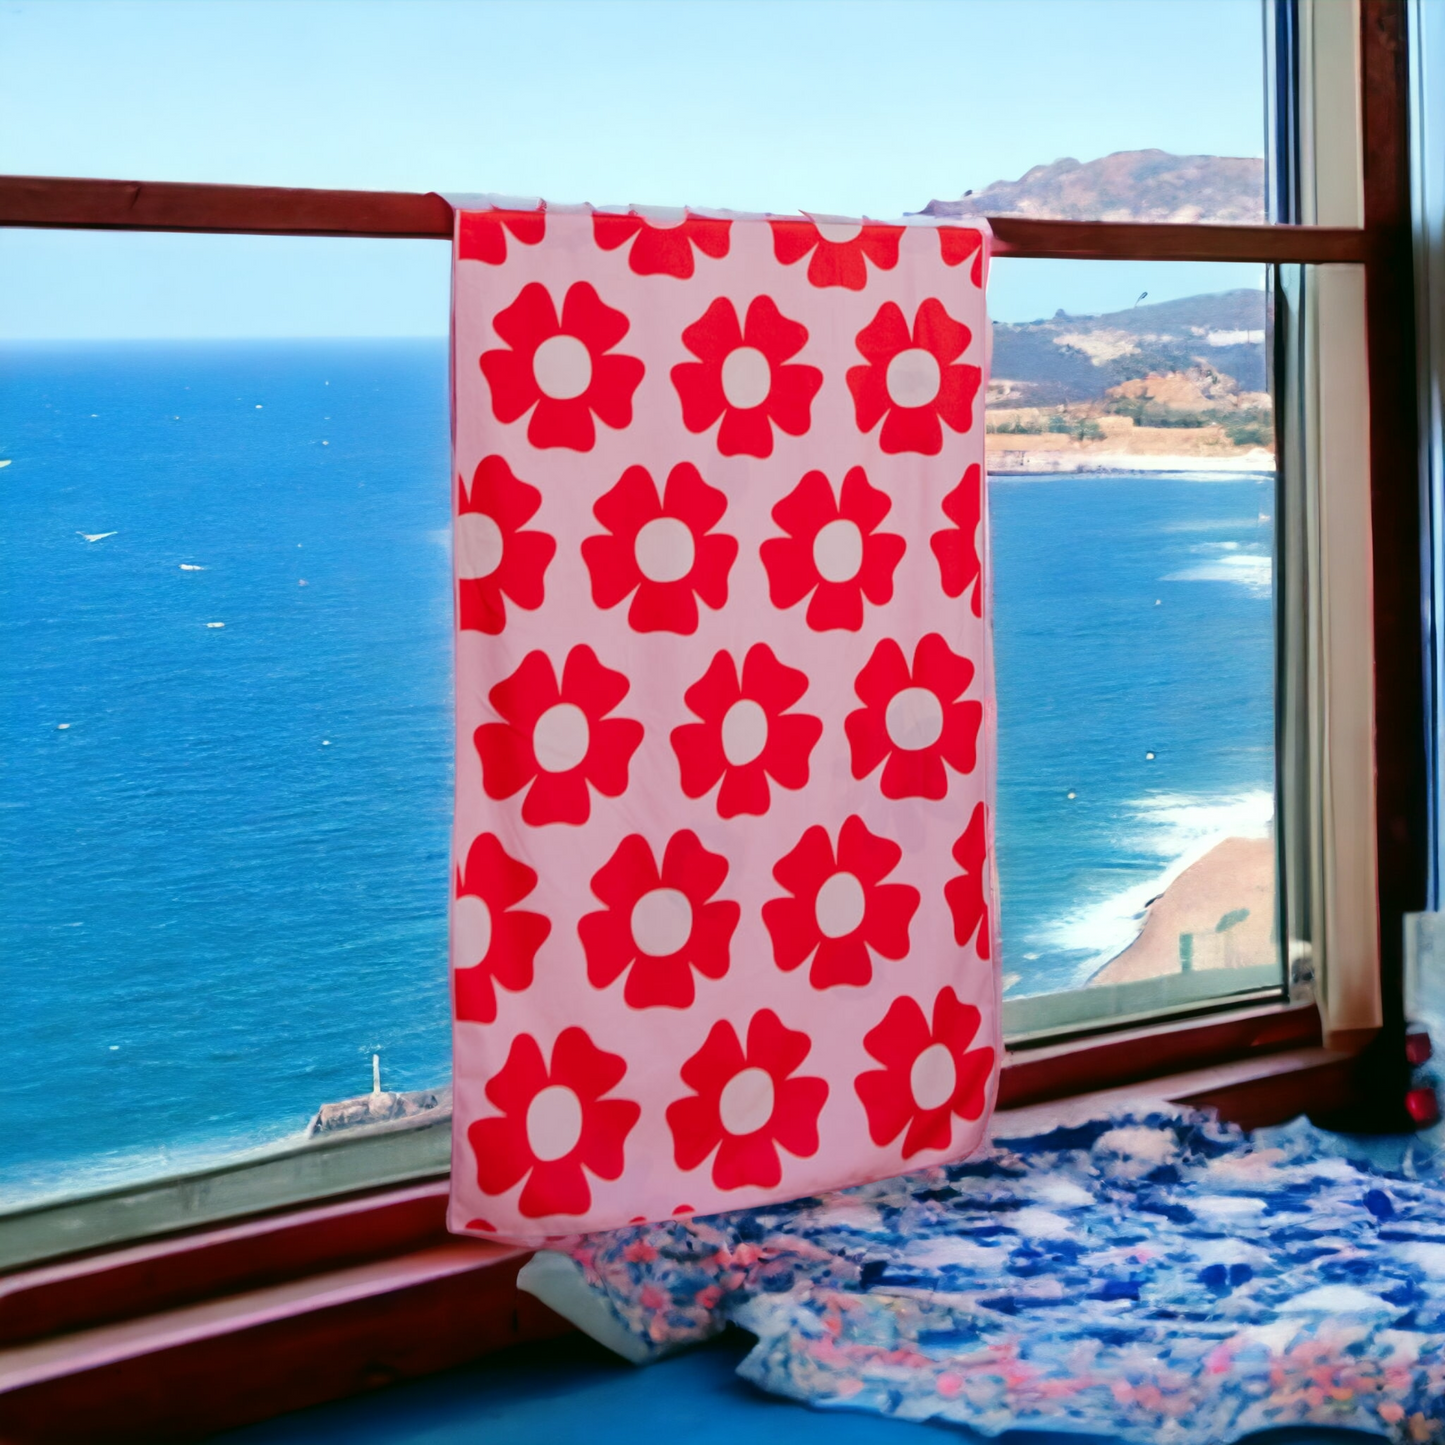 Flower Power Beach Towel Quick Dry with Bag